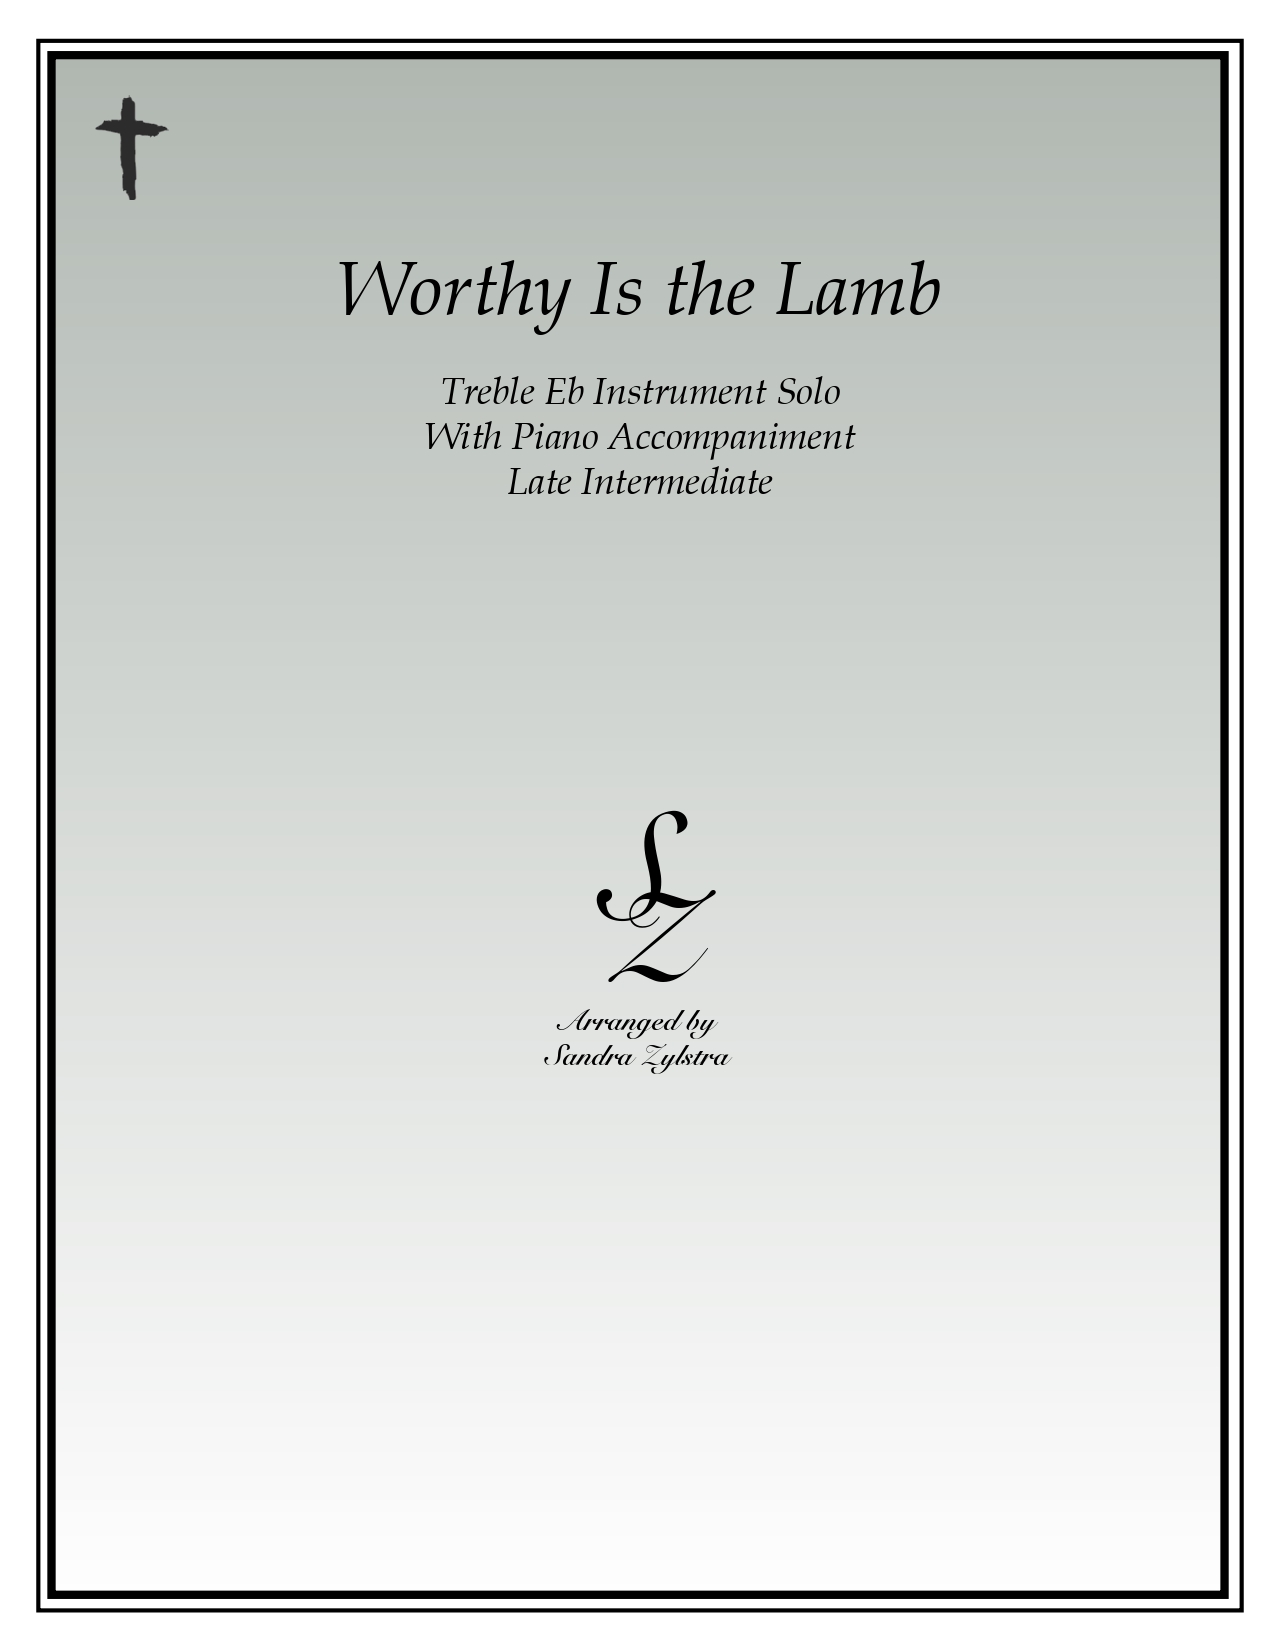 Worthy Is The Lamb Eb instrument solo part cover page 00011